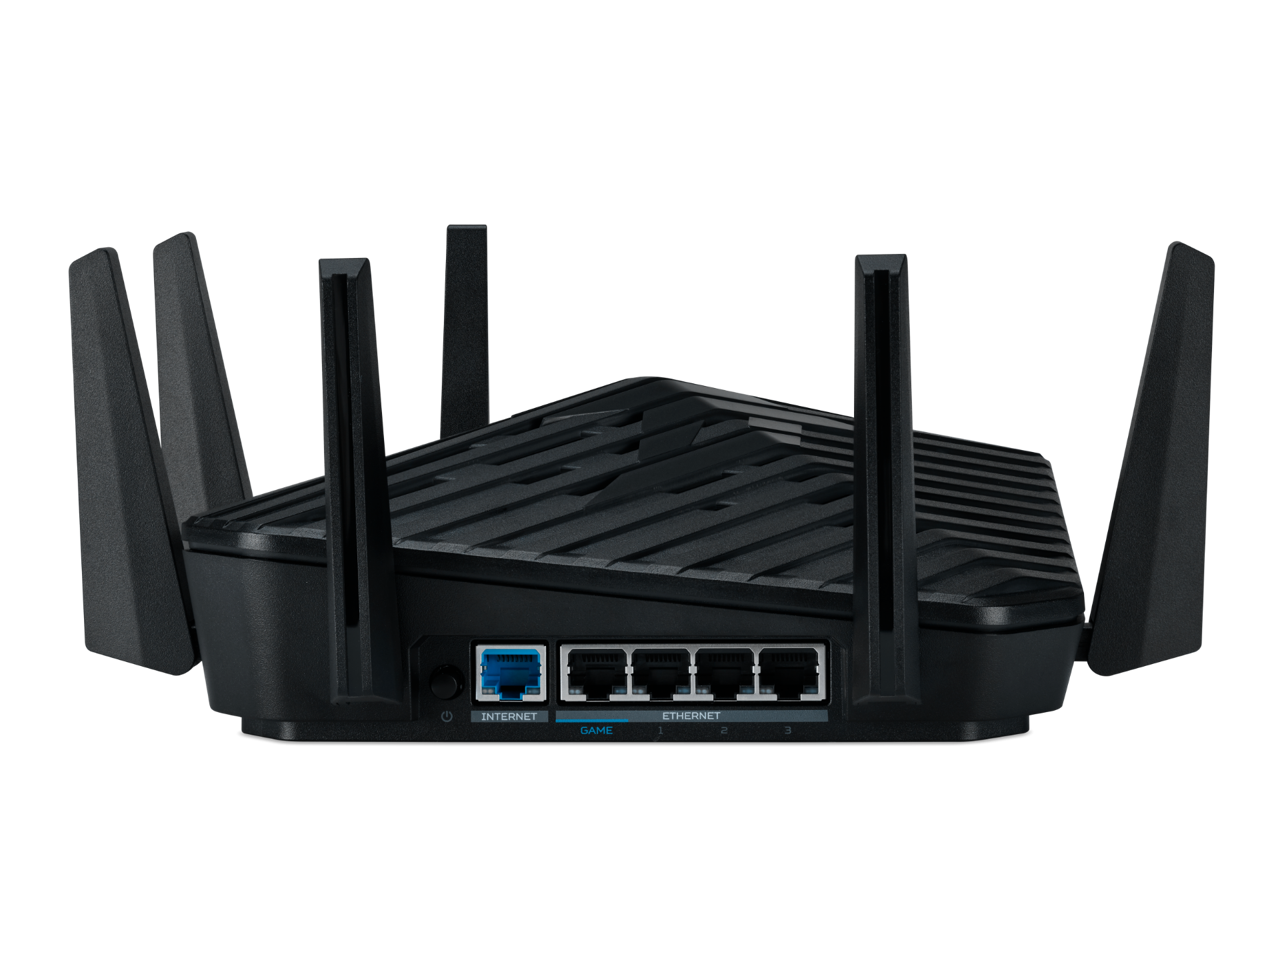 Acer Predator Connect W6 Wi-Fi 6 E Gaming Router | Hybrid Qo S Compatible with Intel Killer Prioritization Engine | Wi-Fi 6 E Tri-Band Axe7800 (2.4 G Hz/5 G Hz/6 G Hz | Gigabit Router | Lifetime Internet Security